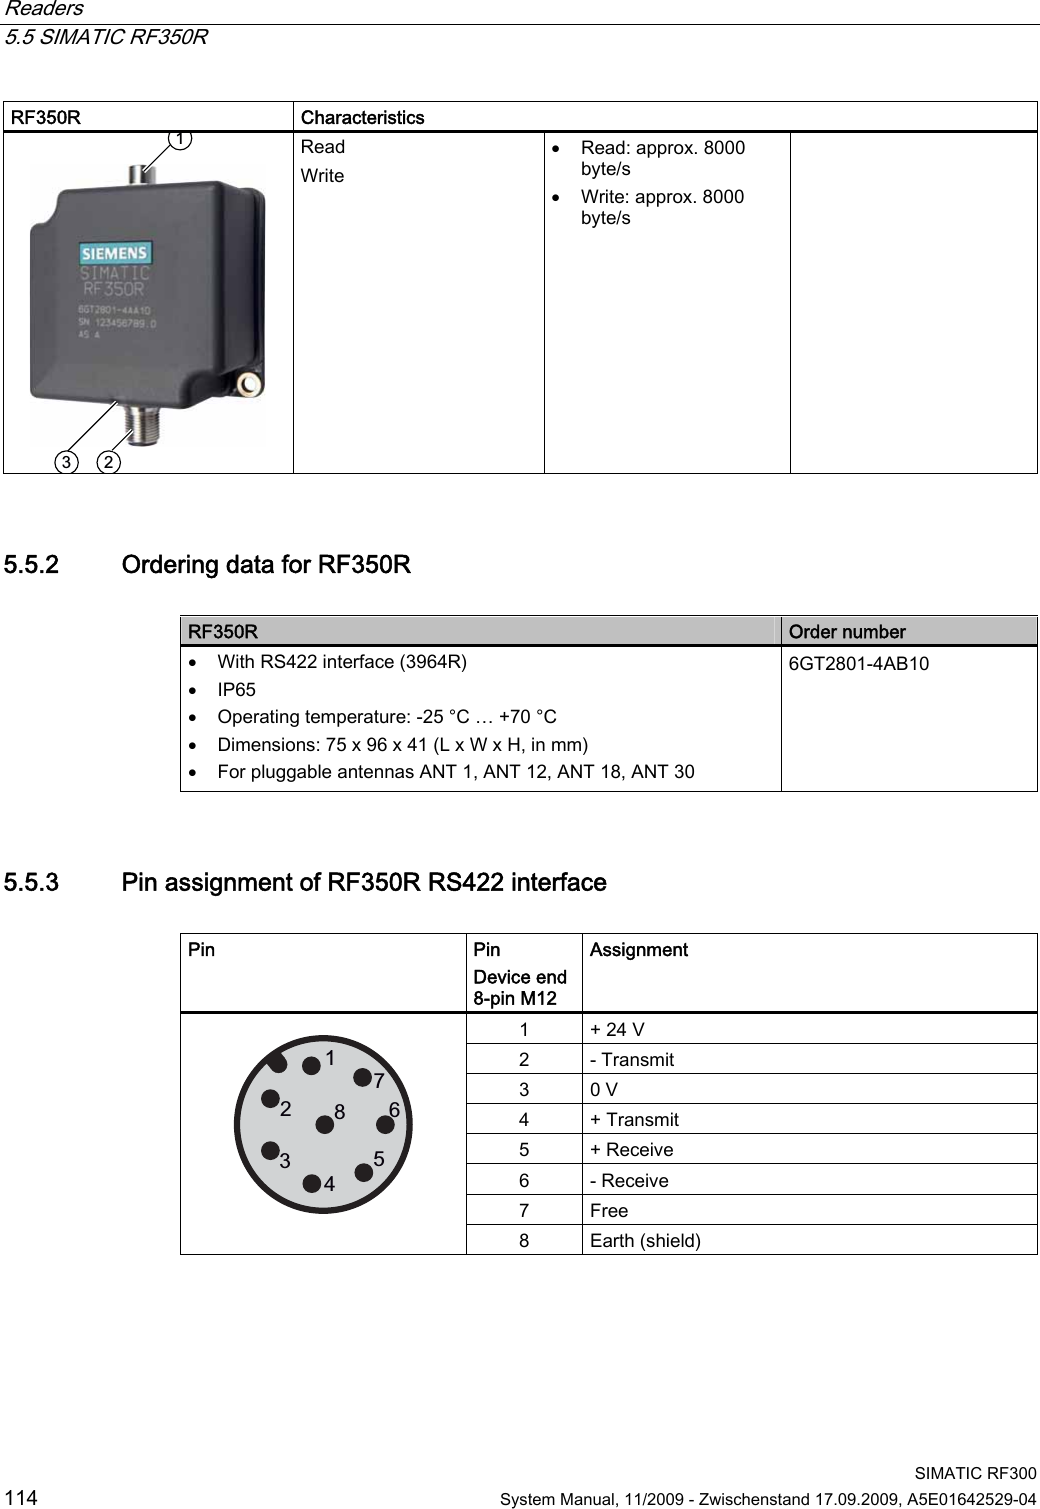 Readers   5.5 SIMATIC RF350R  SIMATIC RF300 114  System Manual, 11/2009 - Zwischenstand 17.09.2009, A5E01642529-04 RF350R   Characteristics  Read Write  Read: approx. 8000 byte/s  Write: approx. 8000 byte/s  5.5.2 Ordering data for RF350R  RF350R  Order number  With RS422 interface (3964R)  IP65  Operating temperature: -25 °C … +70 °C  Dimensions: 75 x 96 x 41 (L x W x H, in mm)  For pluggable antennas ANT 1, ANT 12, ANT 18, ANT 30 6GT2801-4AB10 5.5.3 Pin assignment of RF350R RS422 interface  Pin  Pin Device end 8-pin M12 Assignment 1  + 24 V 2  - Transmit 3  0 V 4  + Transmit 5  + Receive 6  - Receive 7  Free    8  Earth (shield) 